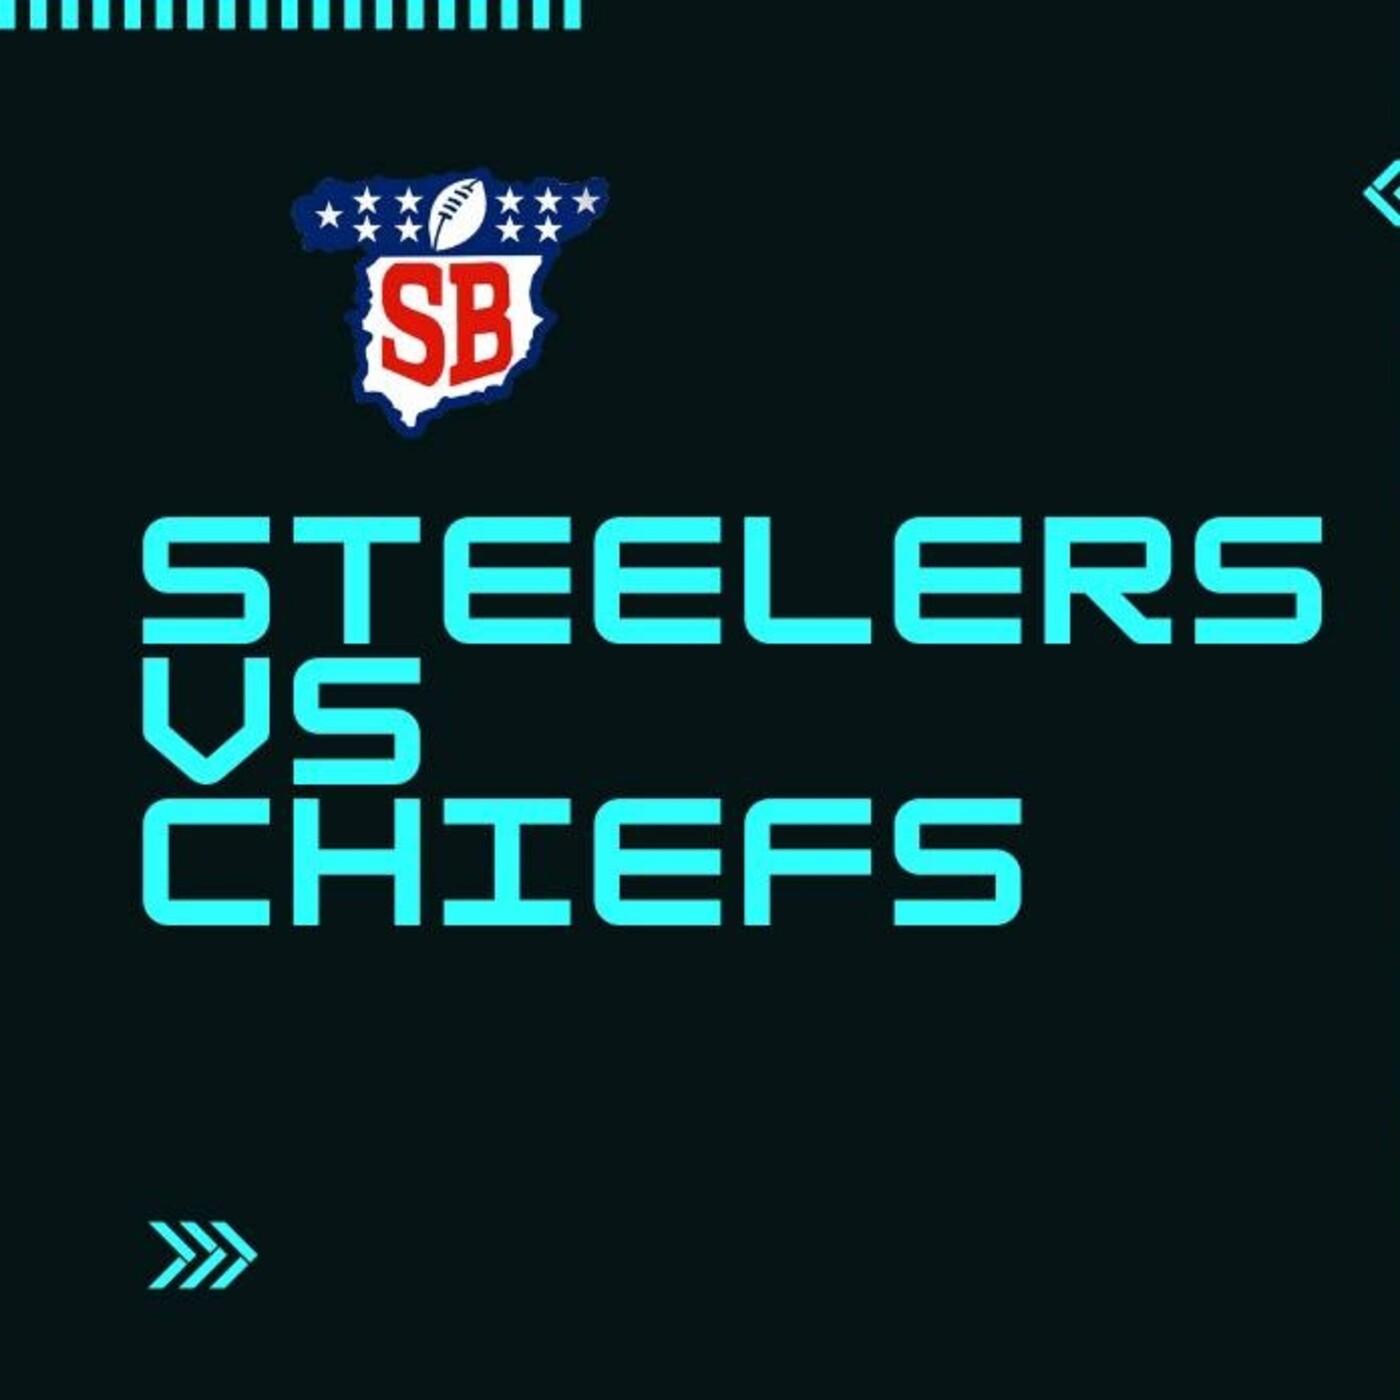 Tic Tac Especial Playoff - Steelers vs Chiefs (Wild Card)